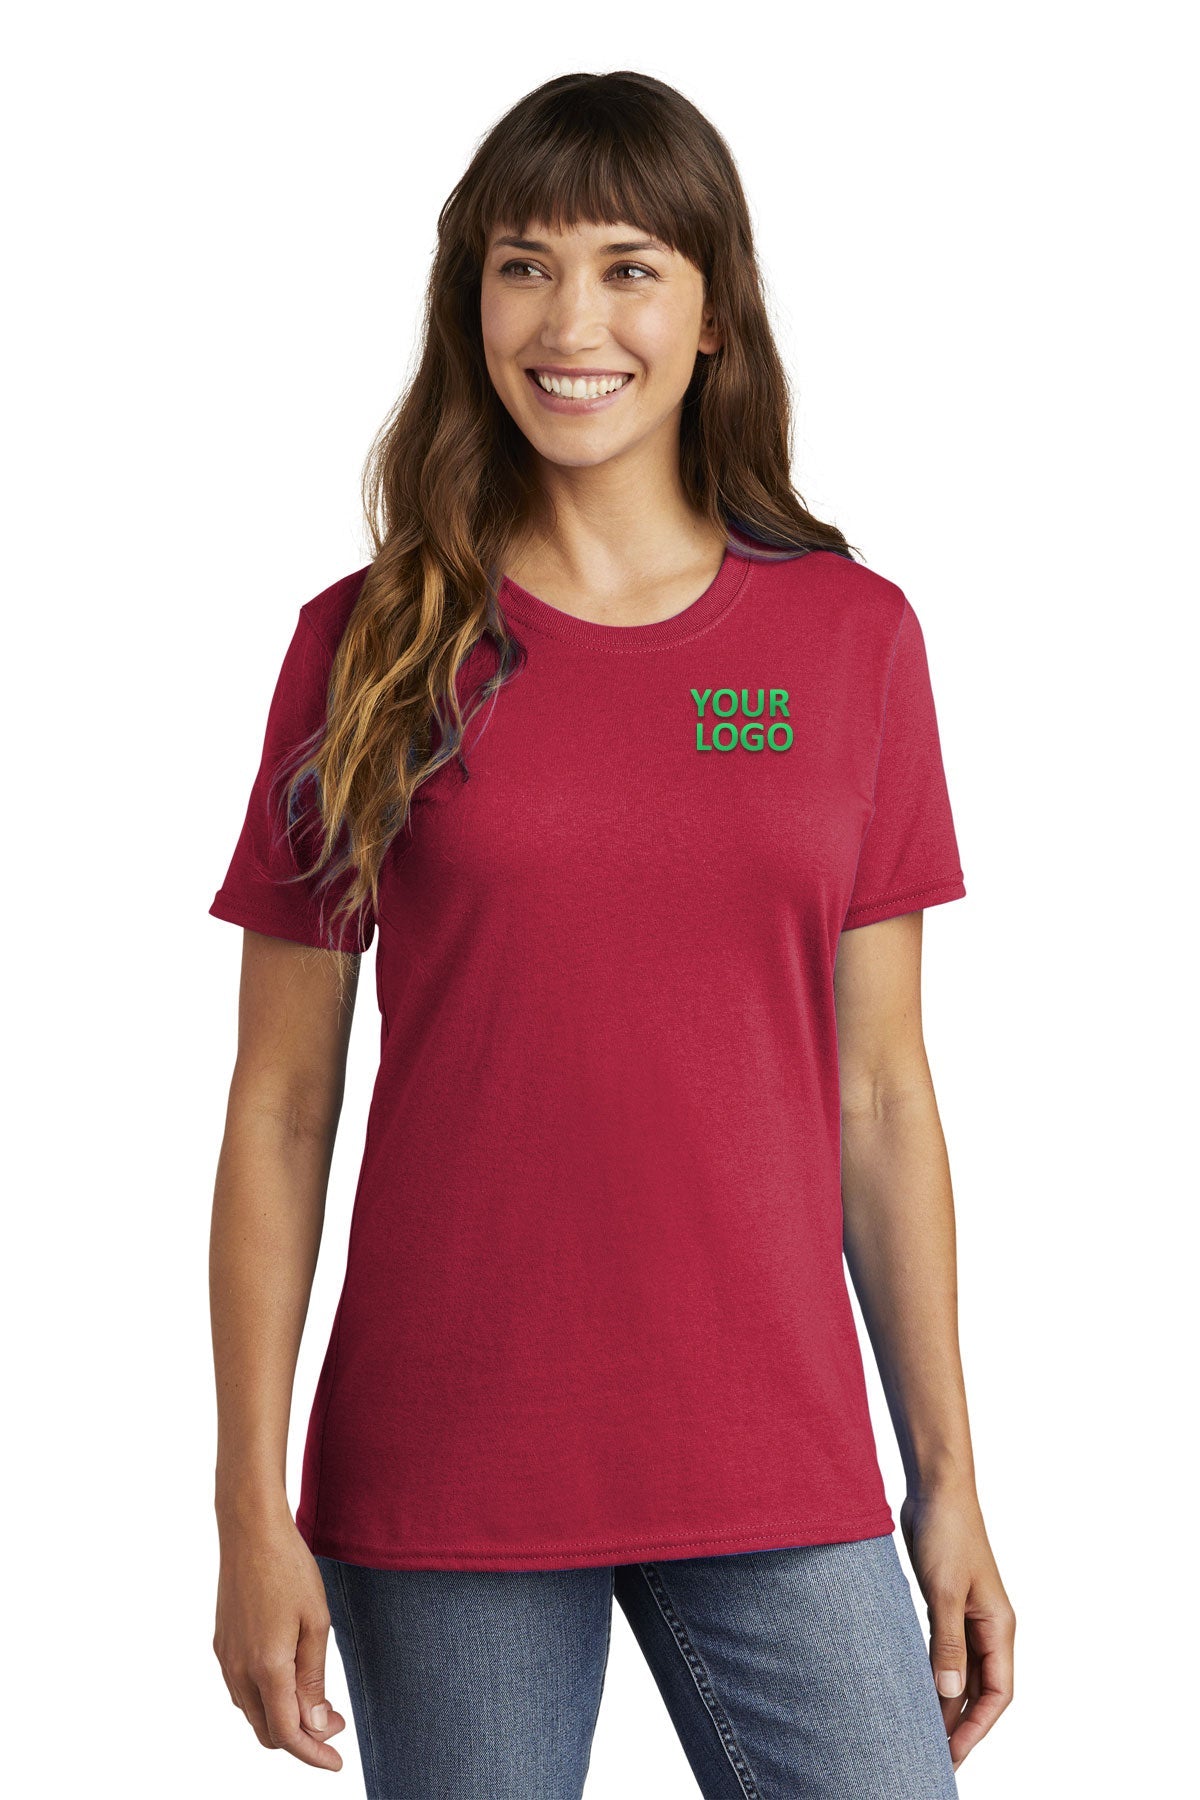 Port & Company Ladies Customized Core Cotton Tee's, Red